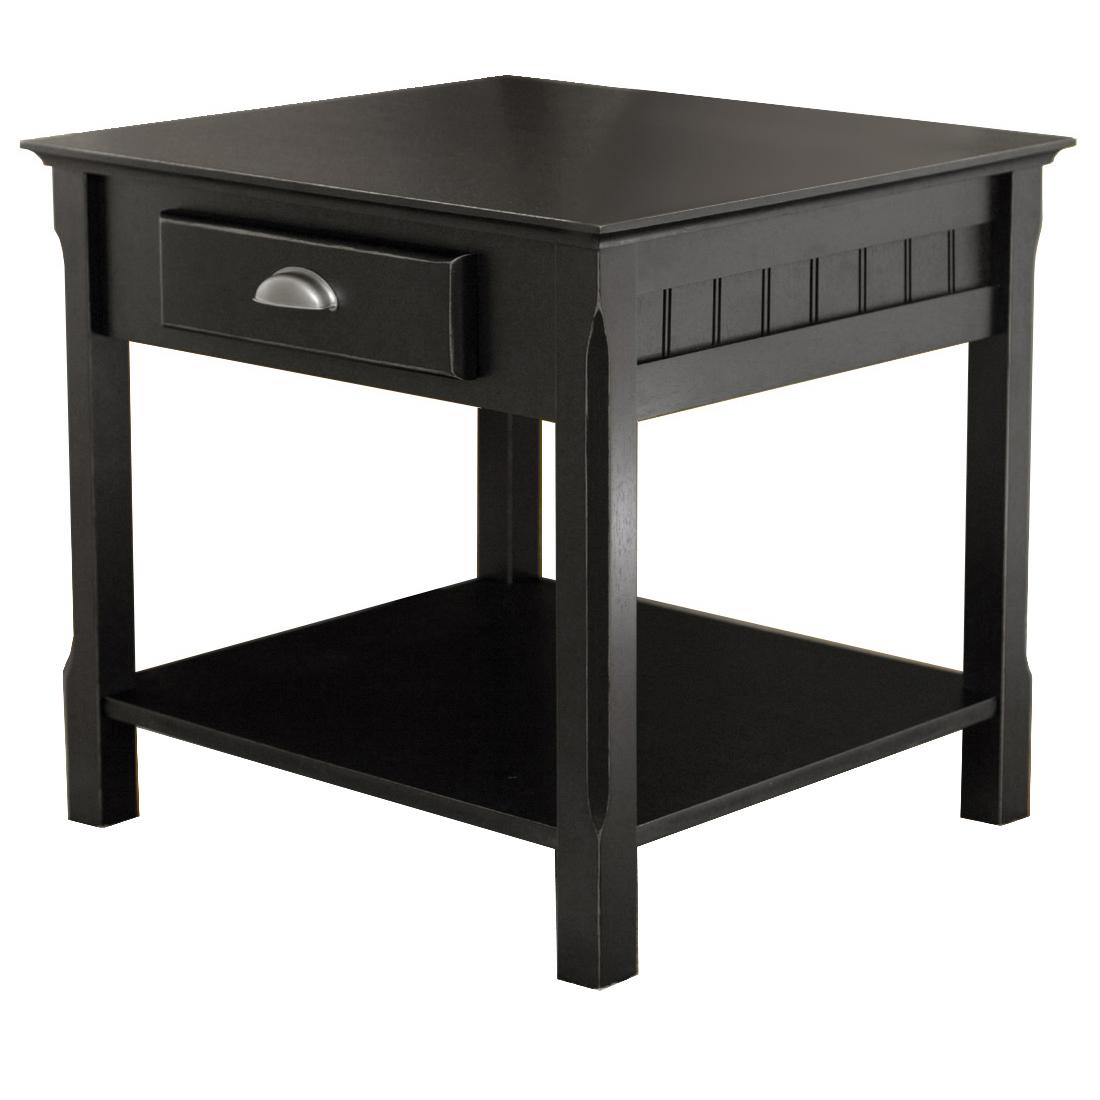 winsome wood end table with drawer and shelf black home one view larger western coffee tables living room decor for brown sofa who makes pottery barn furniture how many inches